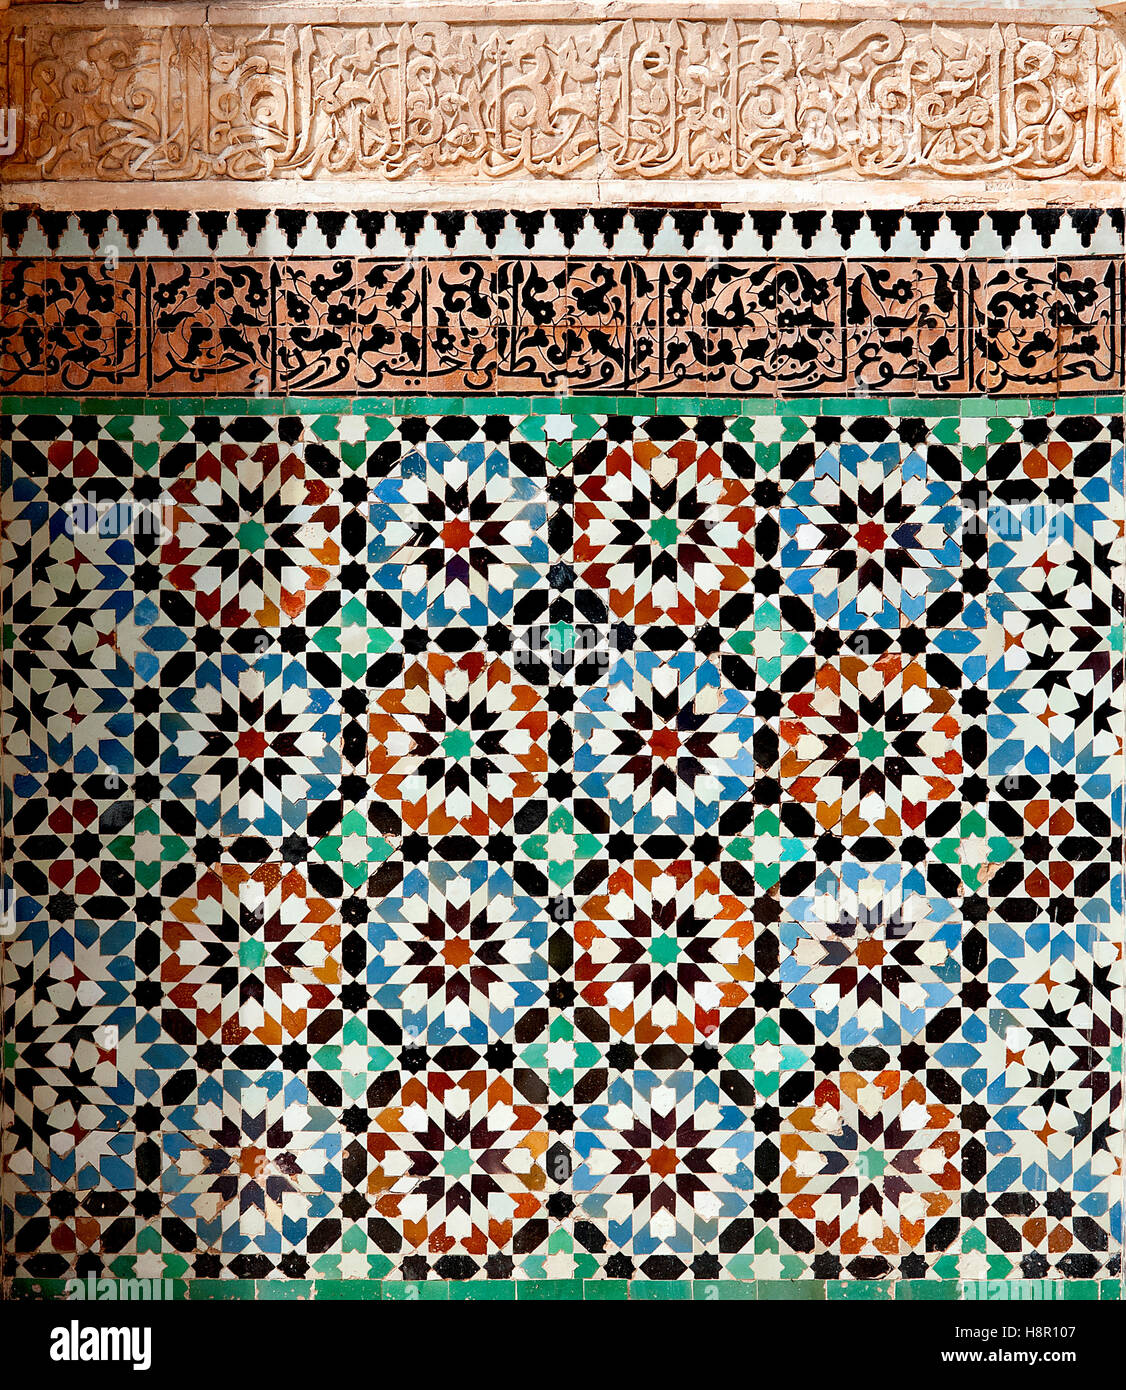 Ben Youssef 'madrasa', Marrakesh, Morocco: colorful mosaics and calligraphy adorn the walls of the Ben Youssef Islamic college. Stock Photo